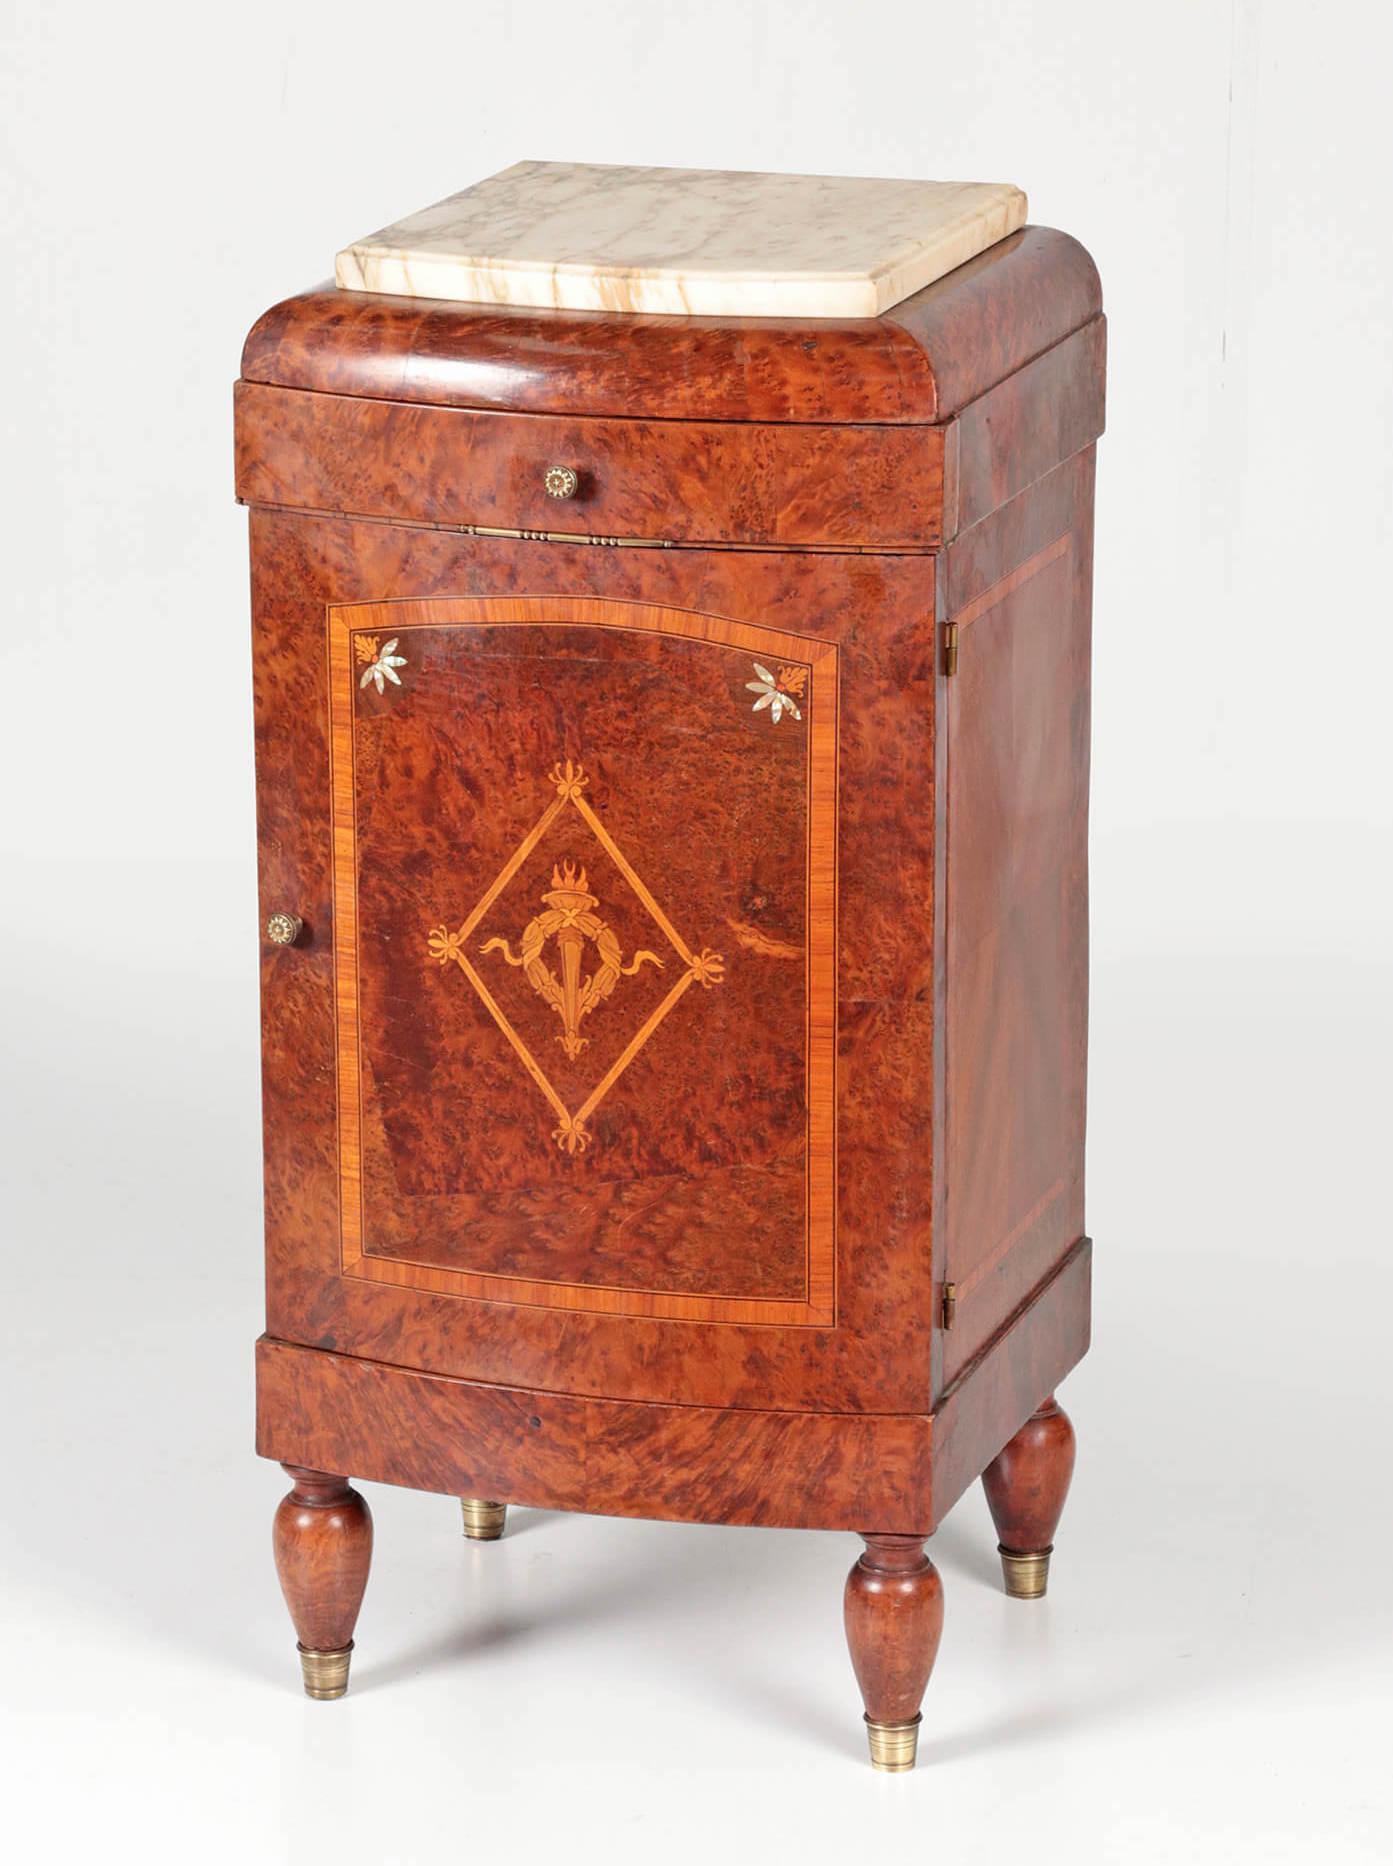 Beautiful antique bedside table, also nice to use as a side cabinet for a hall, for example. The cabinet is veneered with burr walnut and inlaid with mother of pearl. On top a marble plate. The cabinet has one drawer and the upper part of the inside